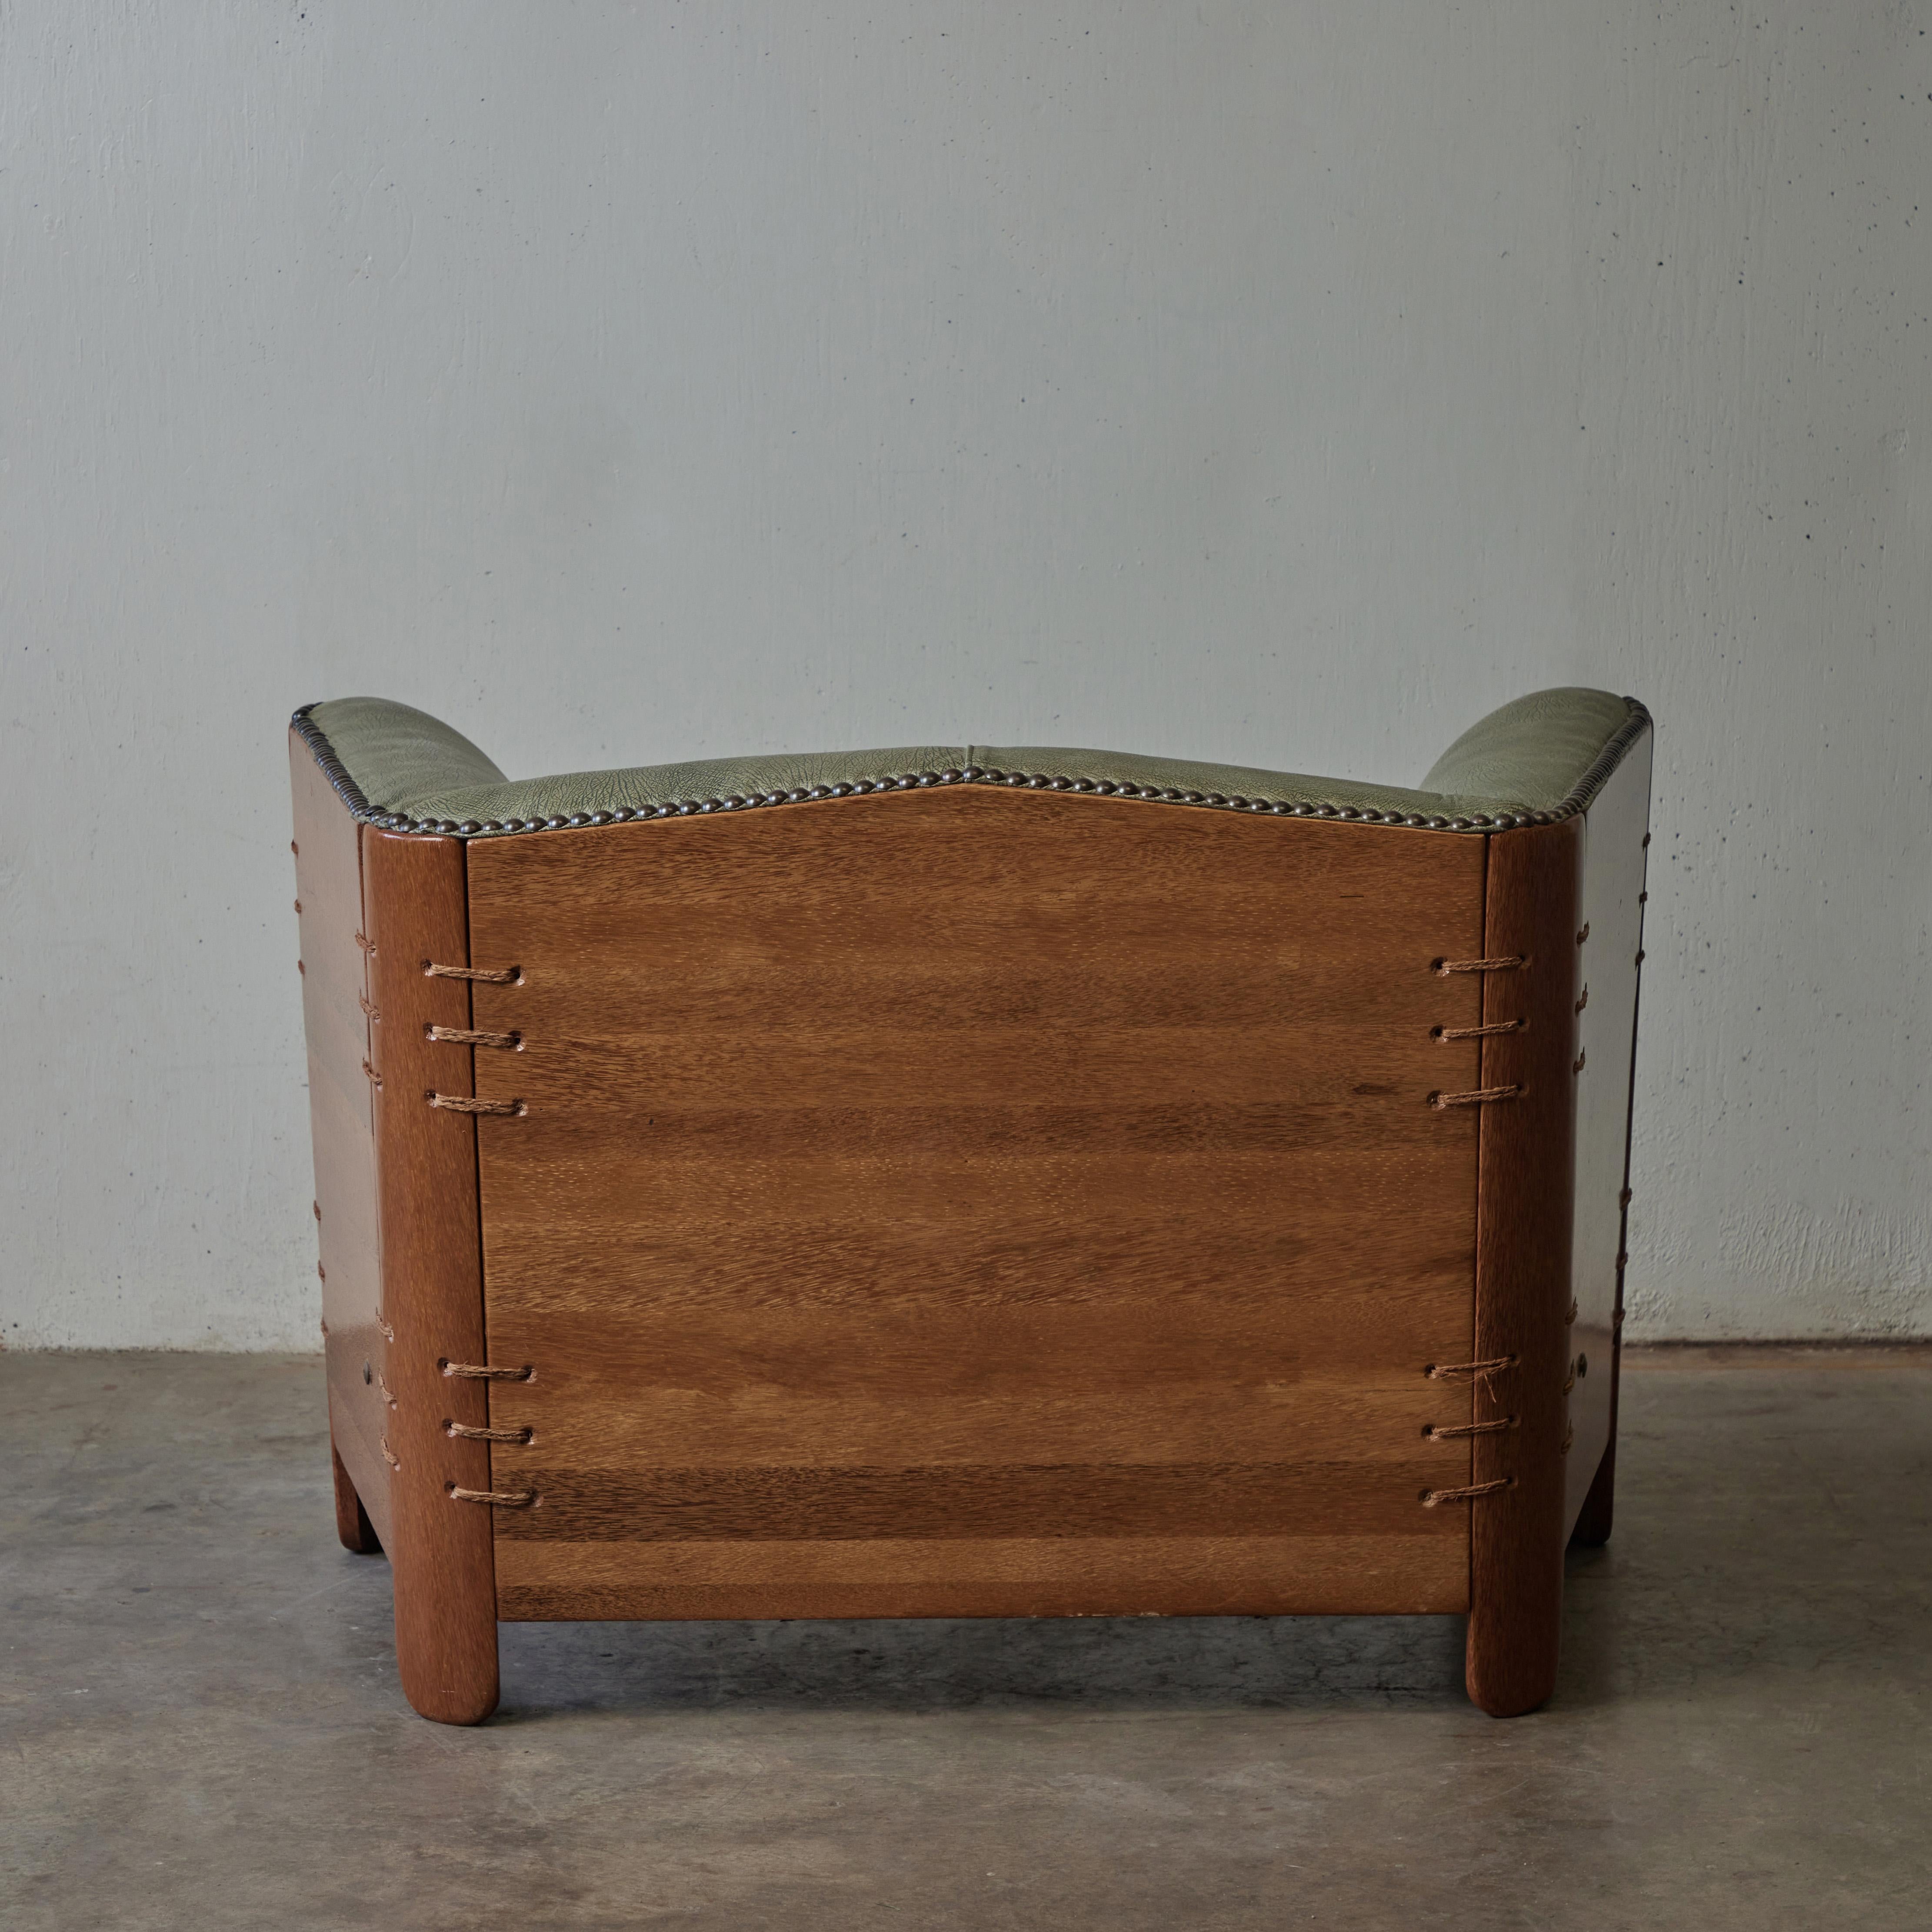 20th Century Pair of Mid-Century Palmwood Chairs with Original Green Leather Upholstery